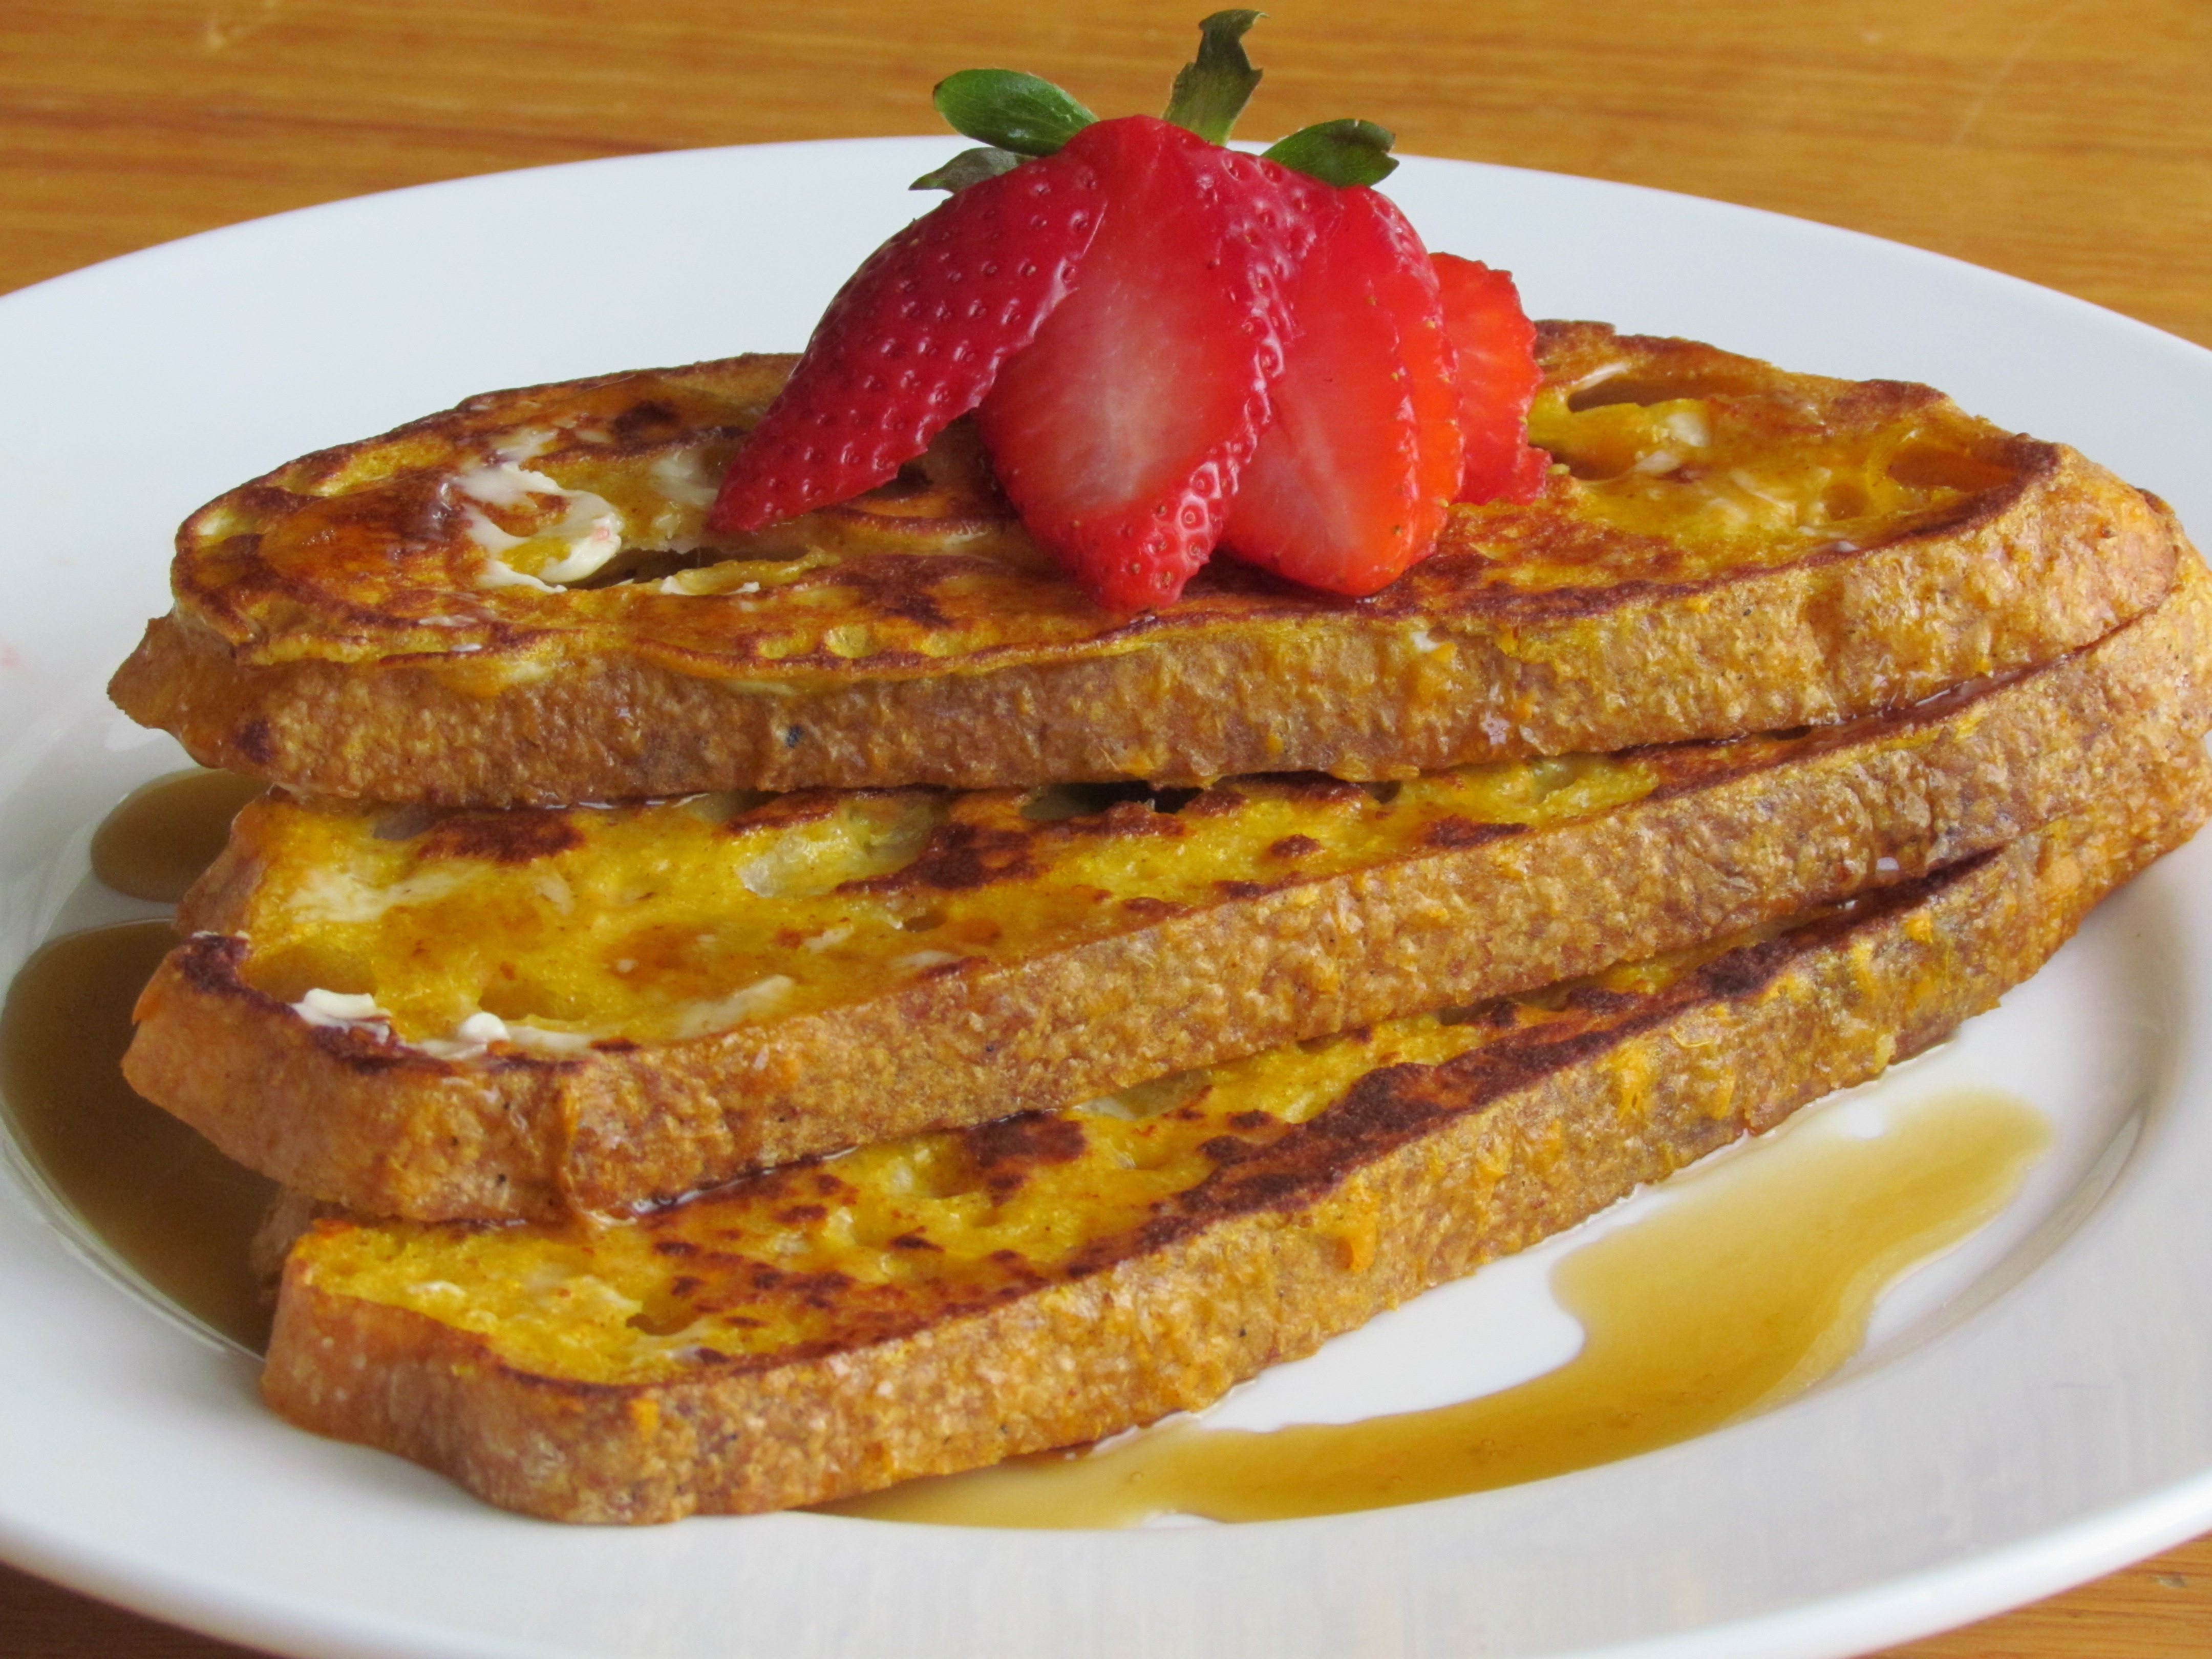 Whip up a bit of fall into your french toast batter and enjoy some extra nutrition at the same time with this recipe. A family favorite in our house!